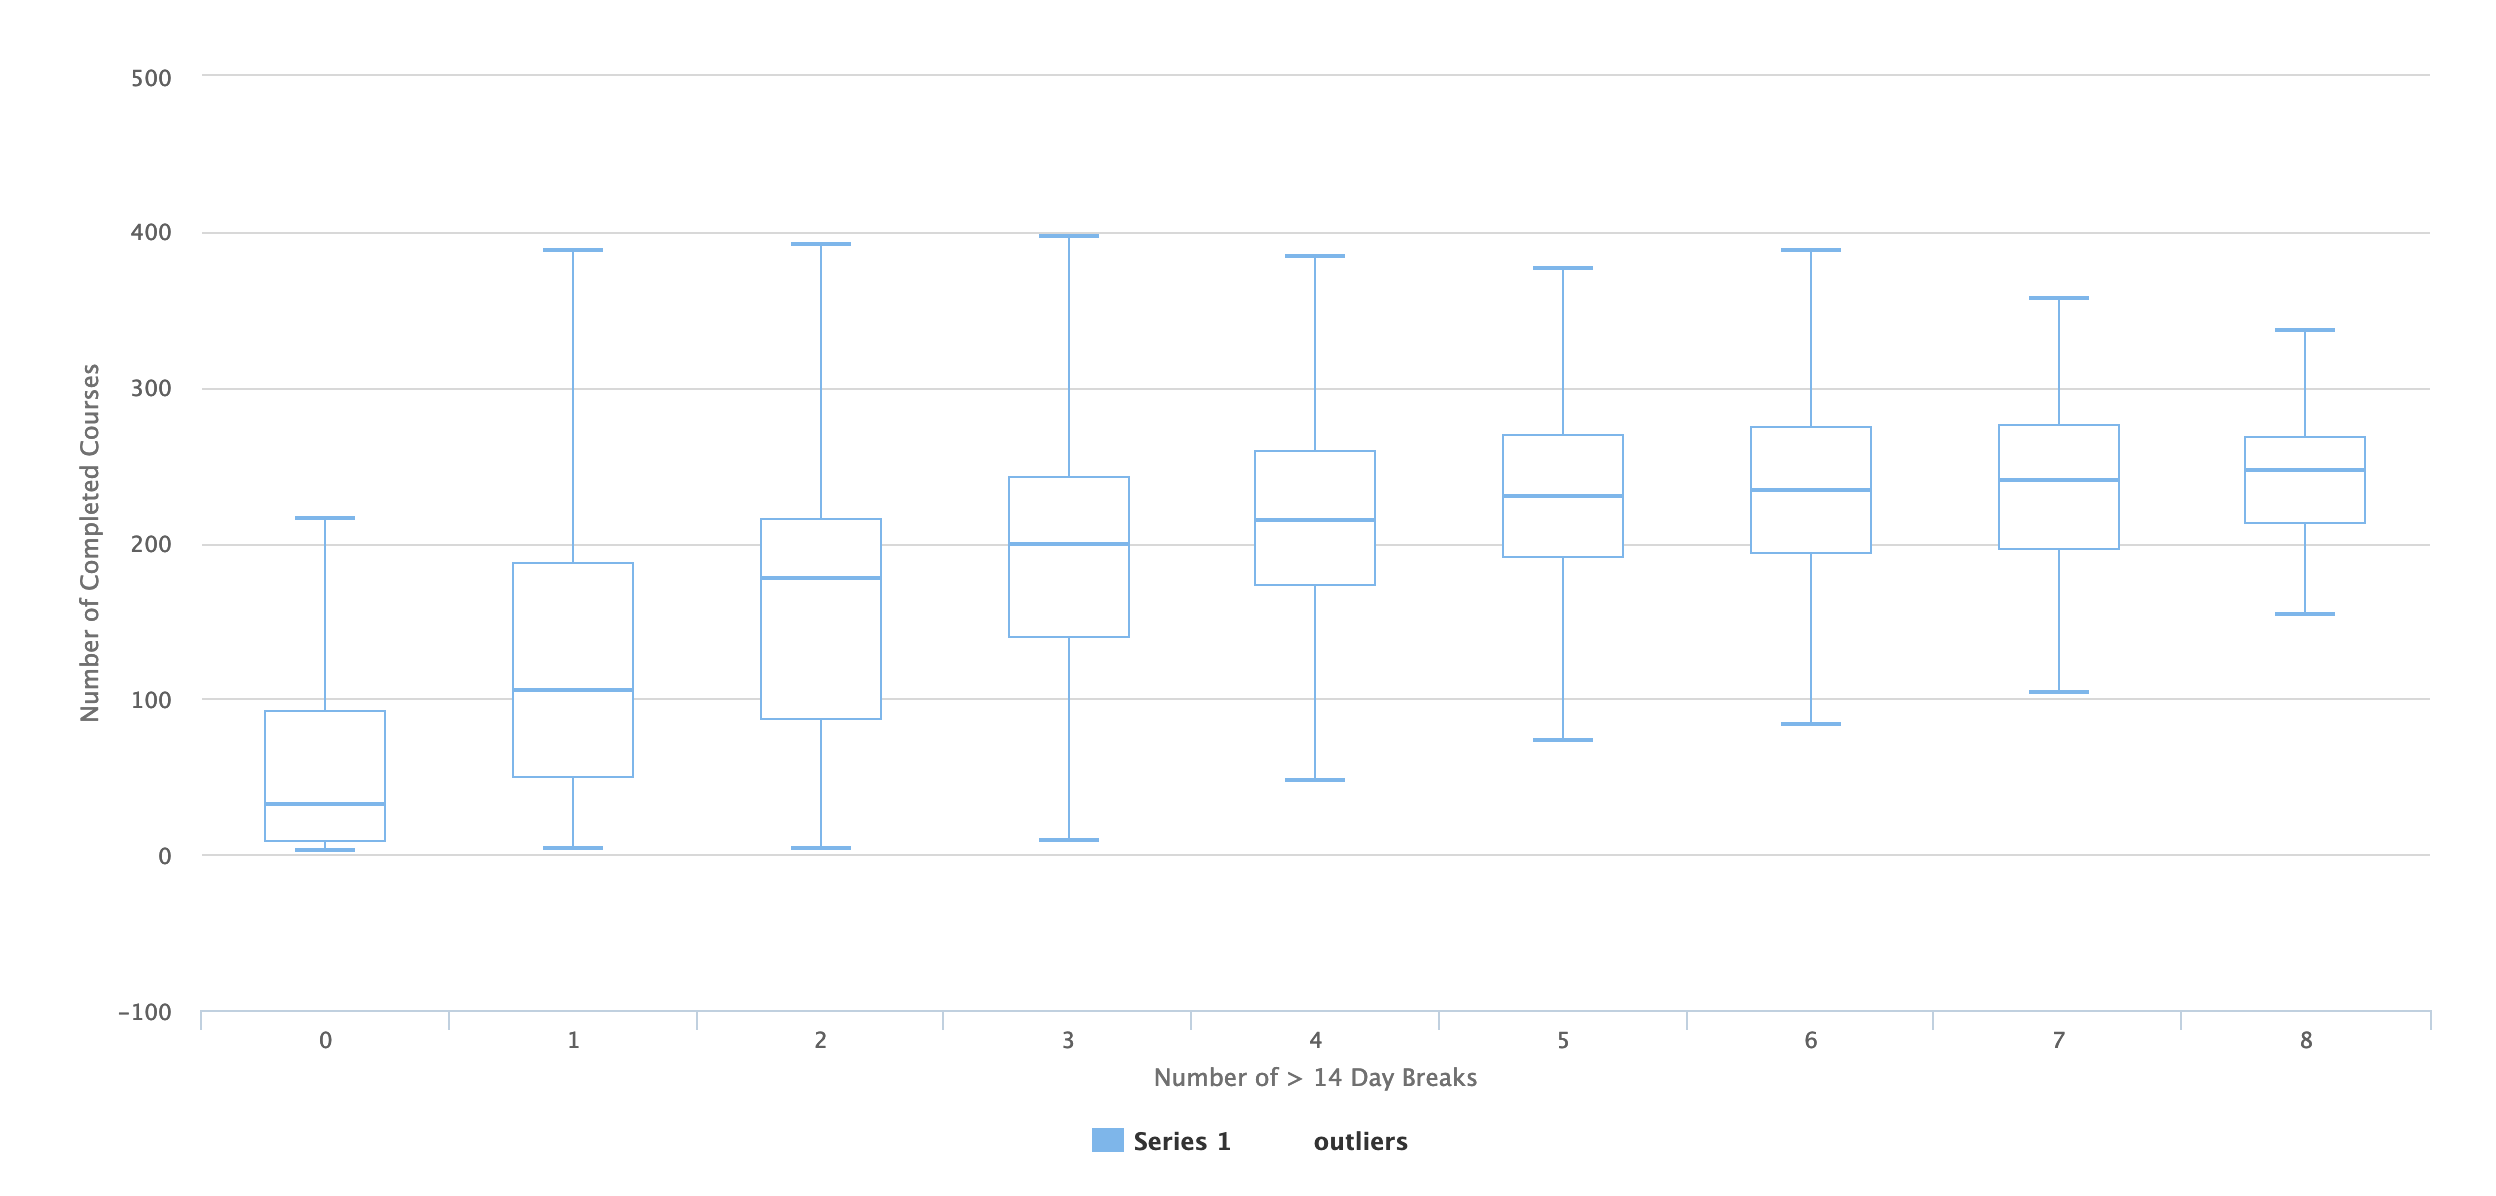 Box and whisker plot showing the number of 2 week or more breaks against the number of completed courses.